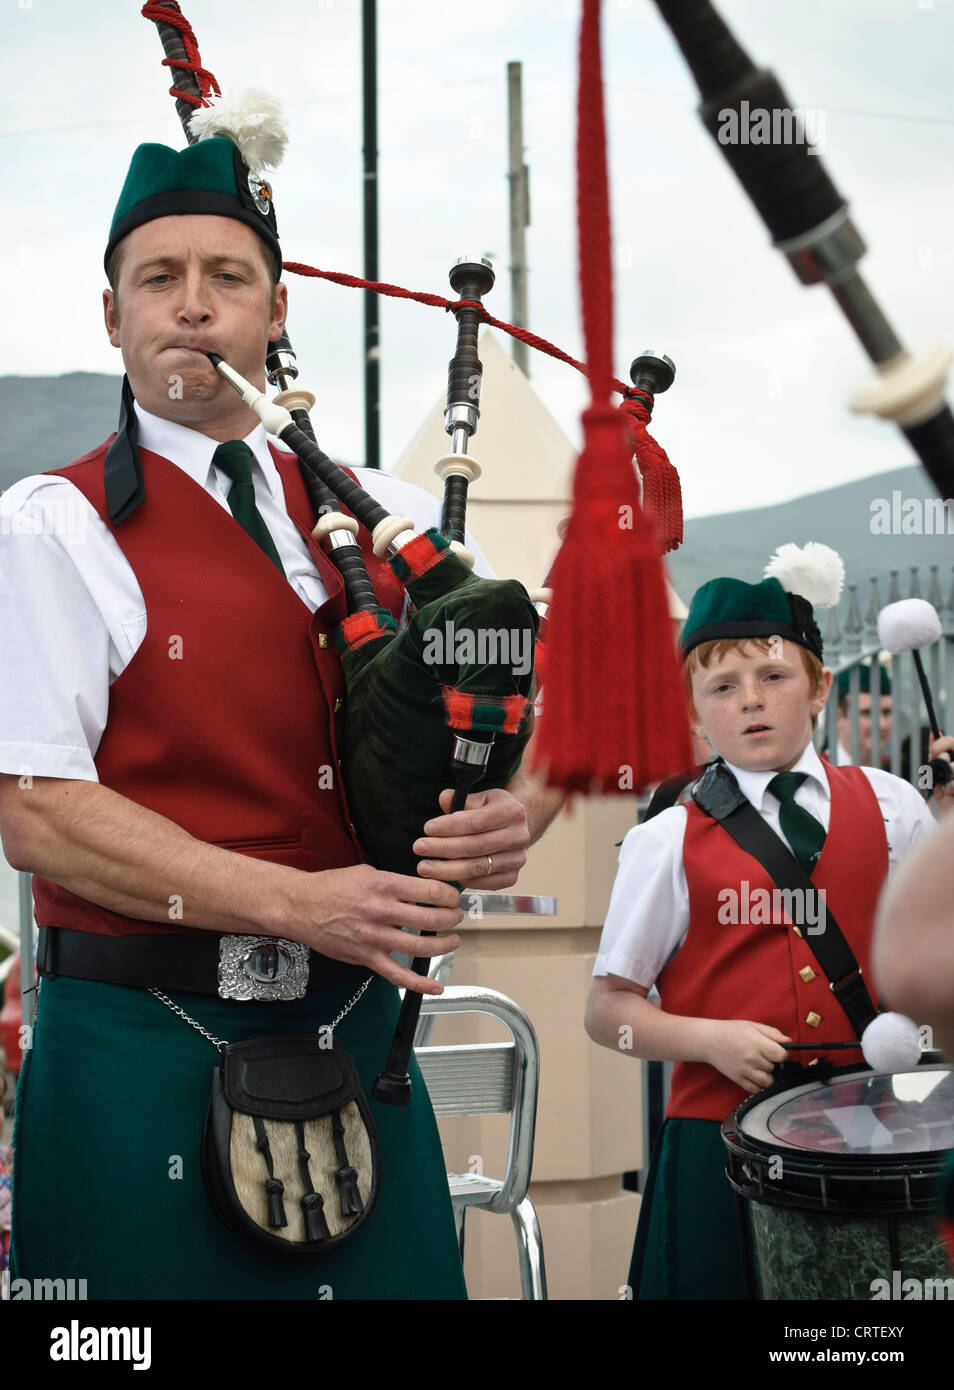 26th June, 2011. Warrenpoint, Northern Ireland. Members of a marching band both young and not so young play drums and a bagpipe. Stock Photo